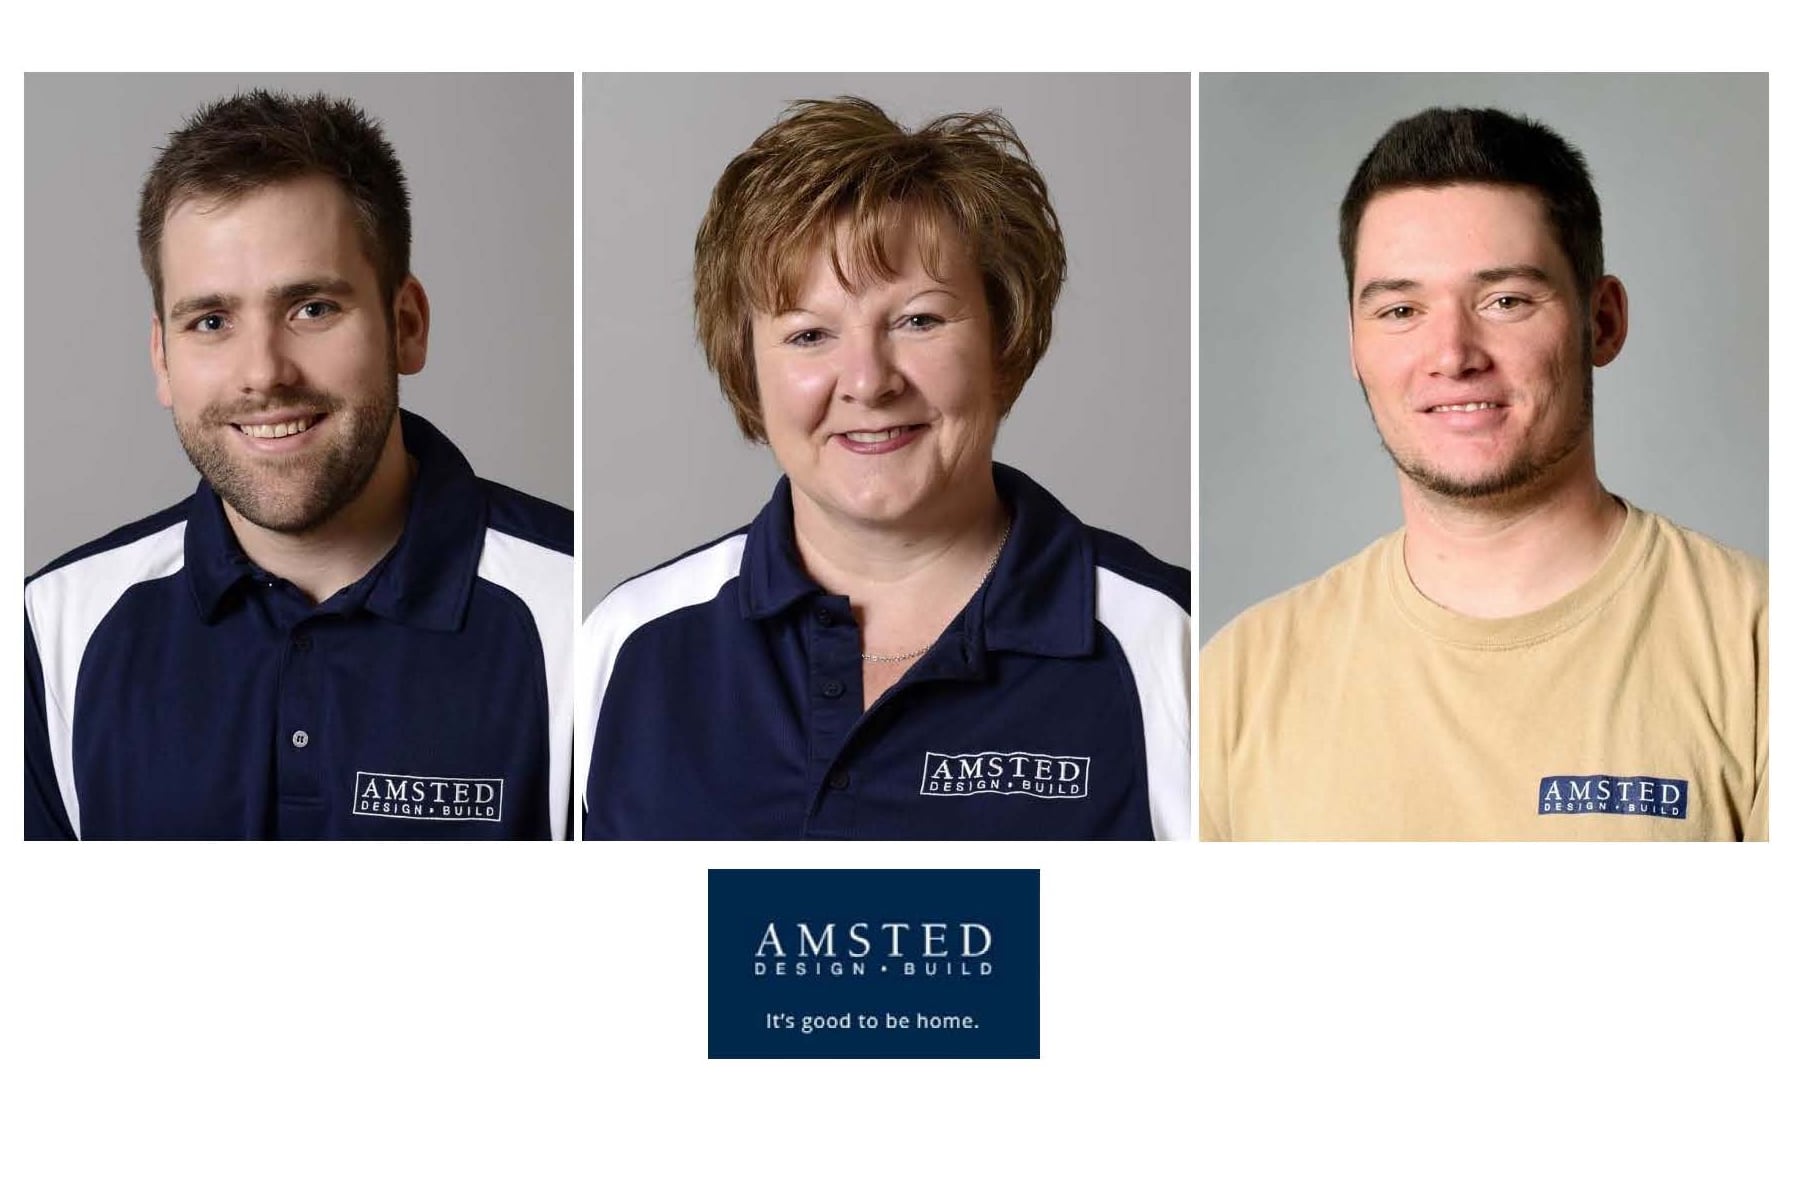 Behind the scenes at Amsted meet the team